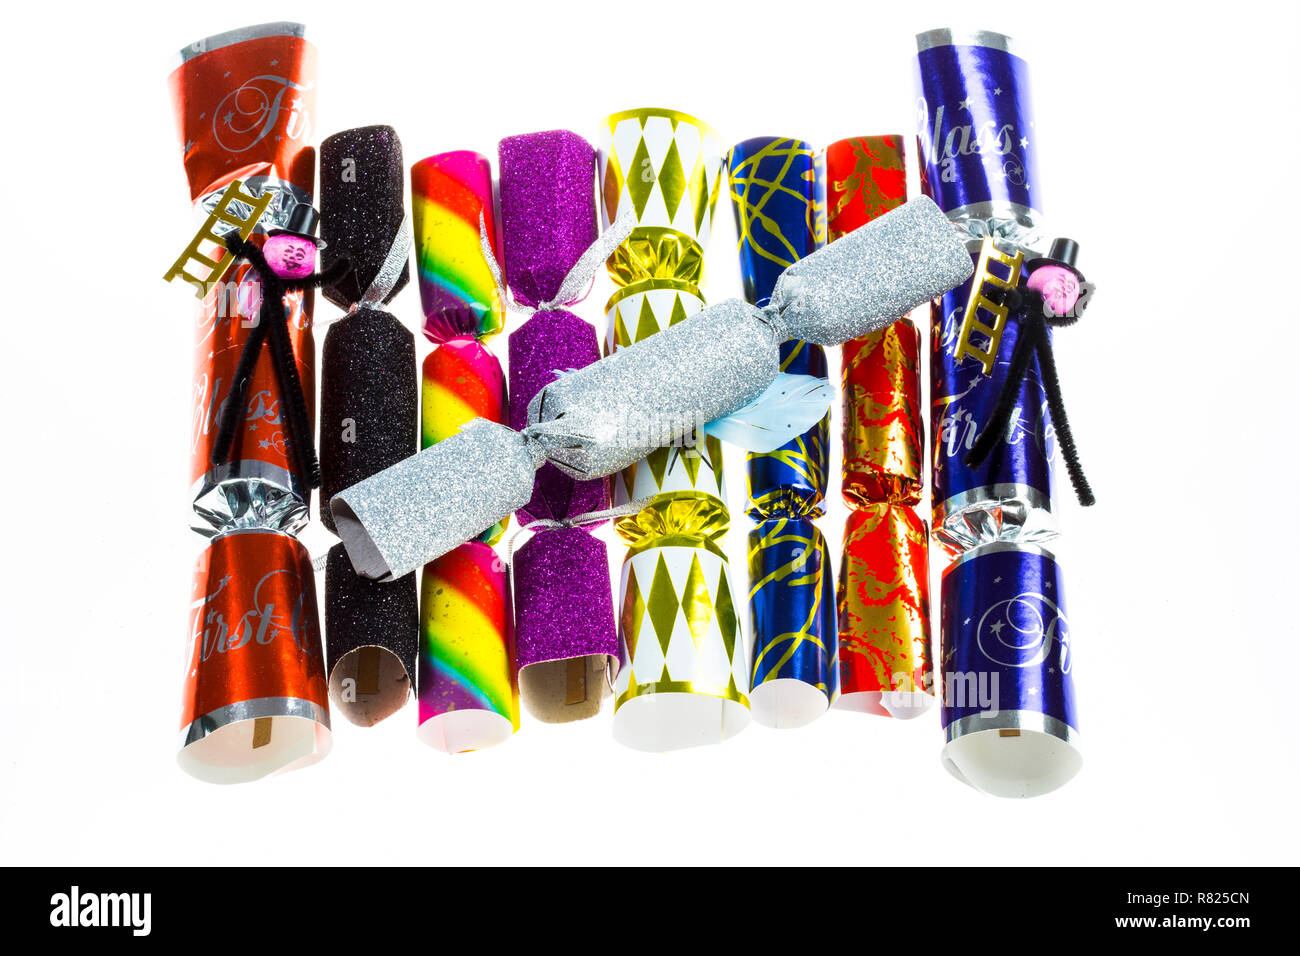 Christmas crackers, party poppers Stock Photo